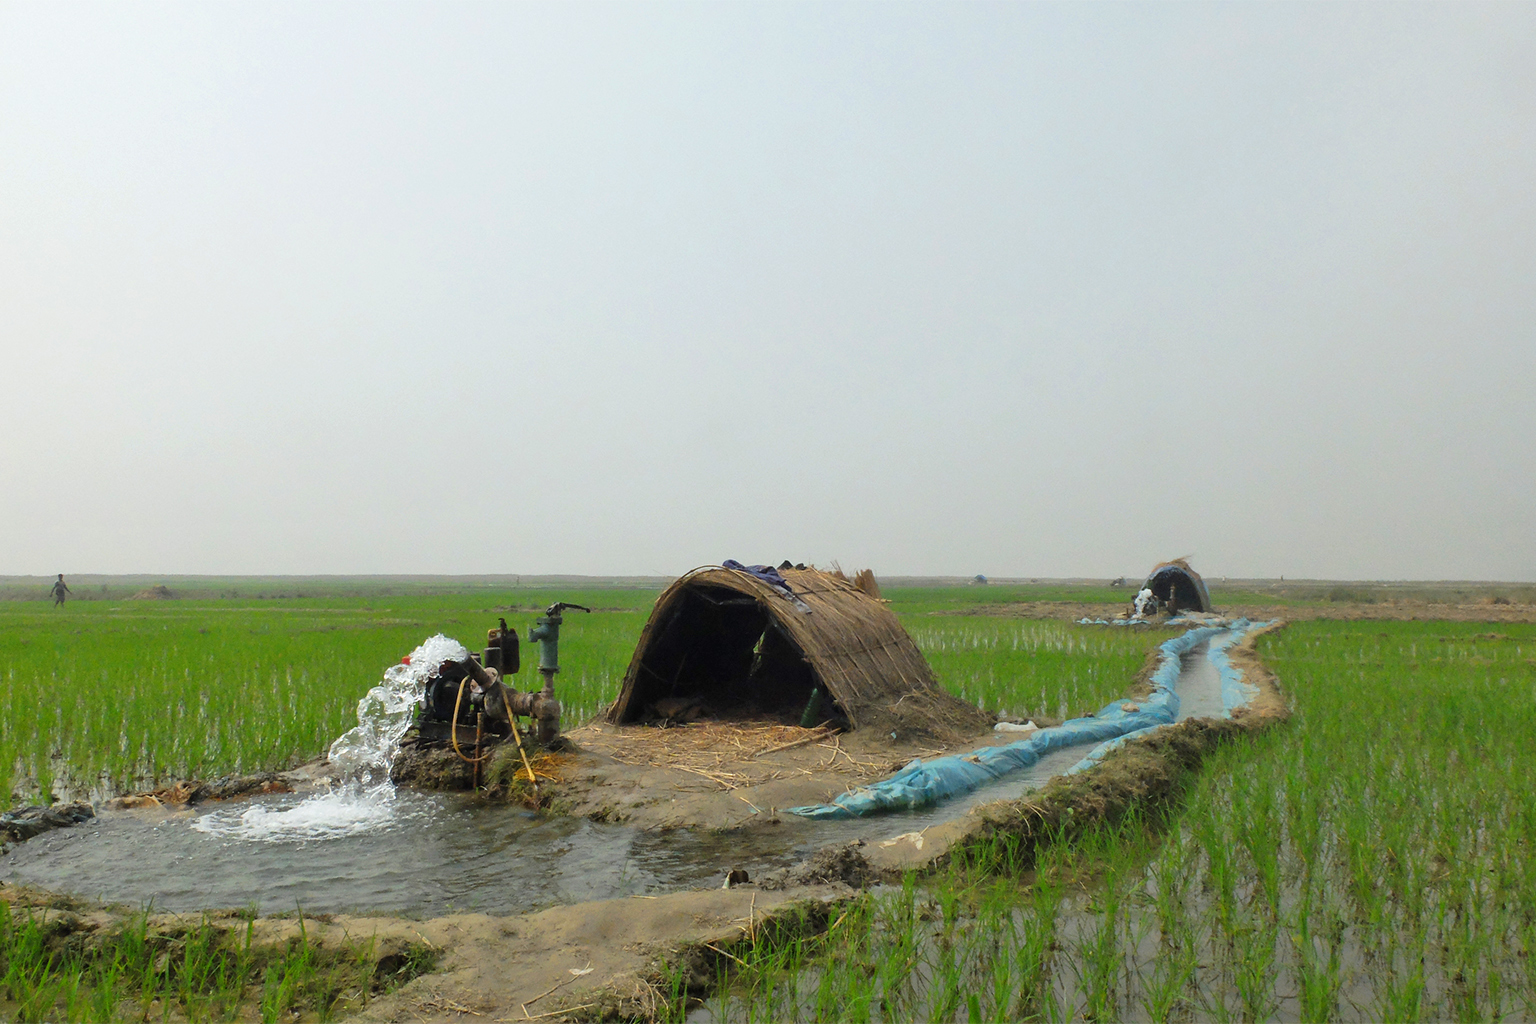 About 77% of Bangladesh's irrigation needs are met by groundwater sources